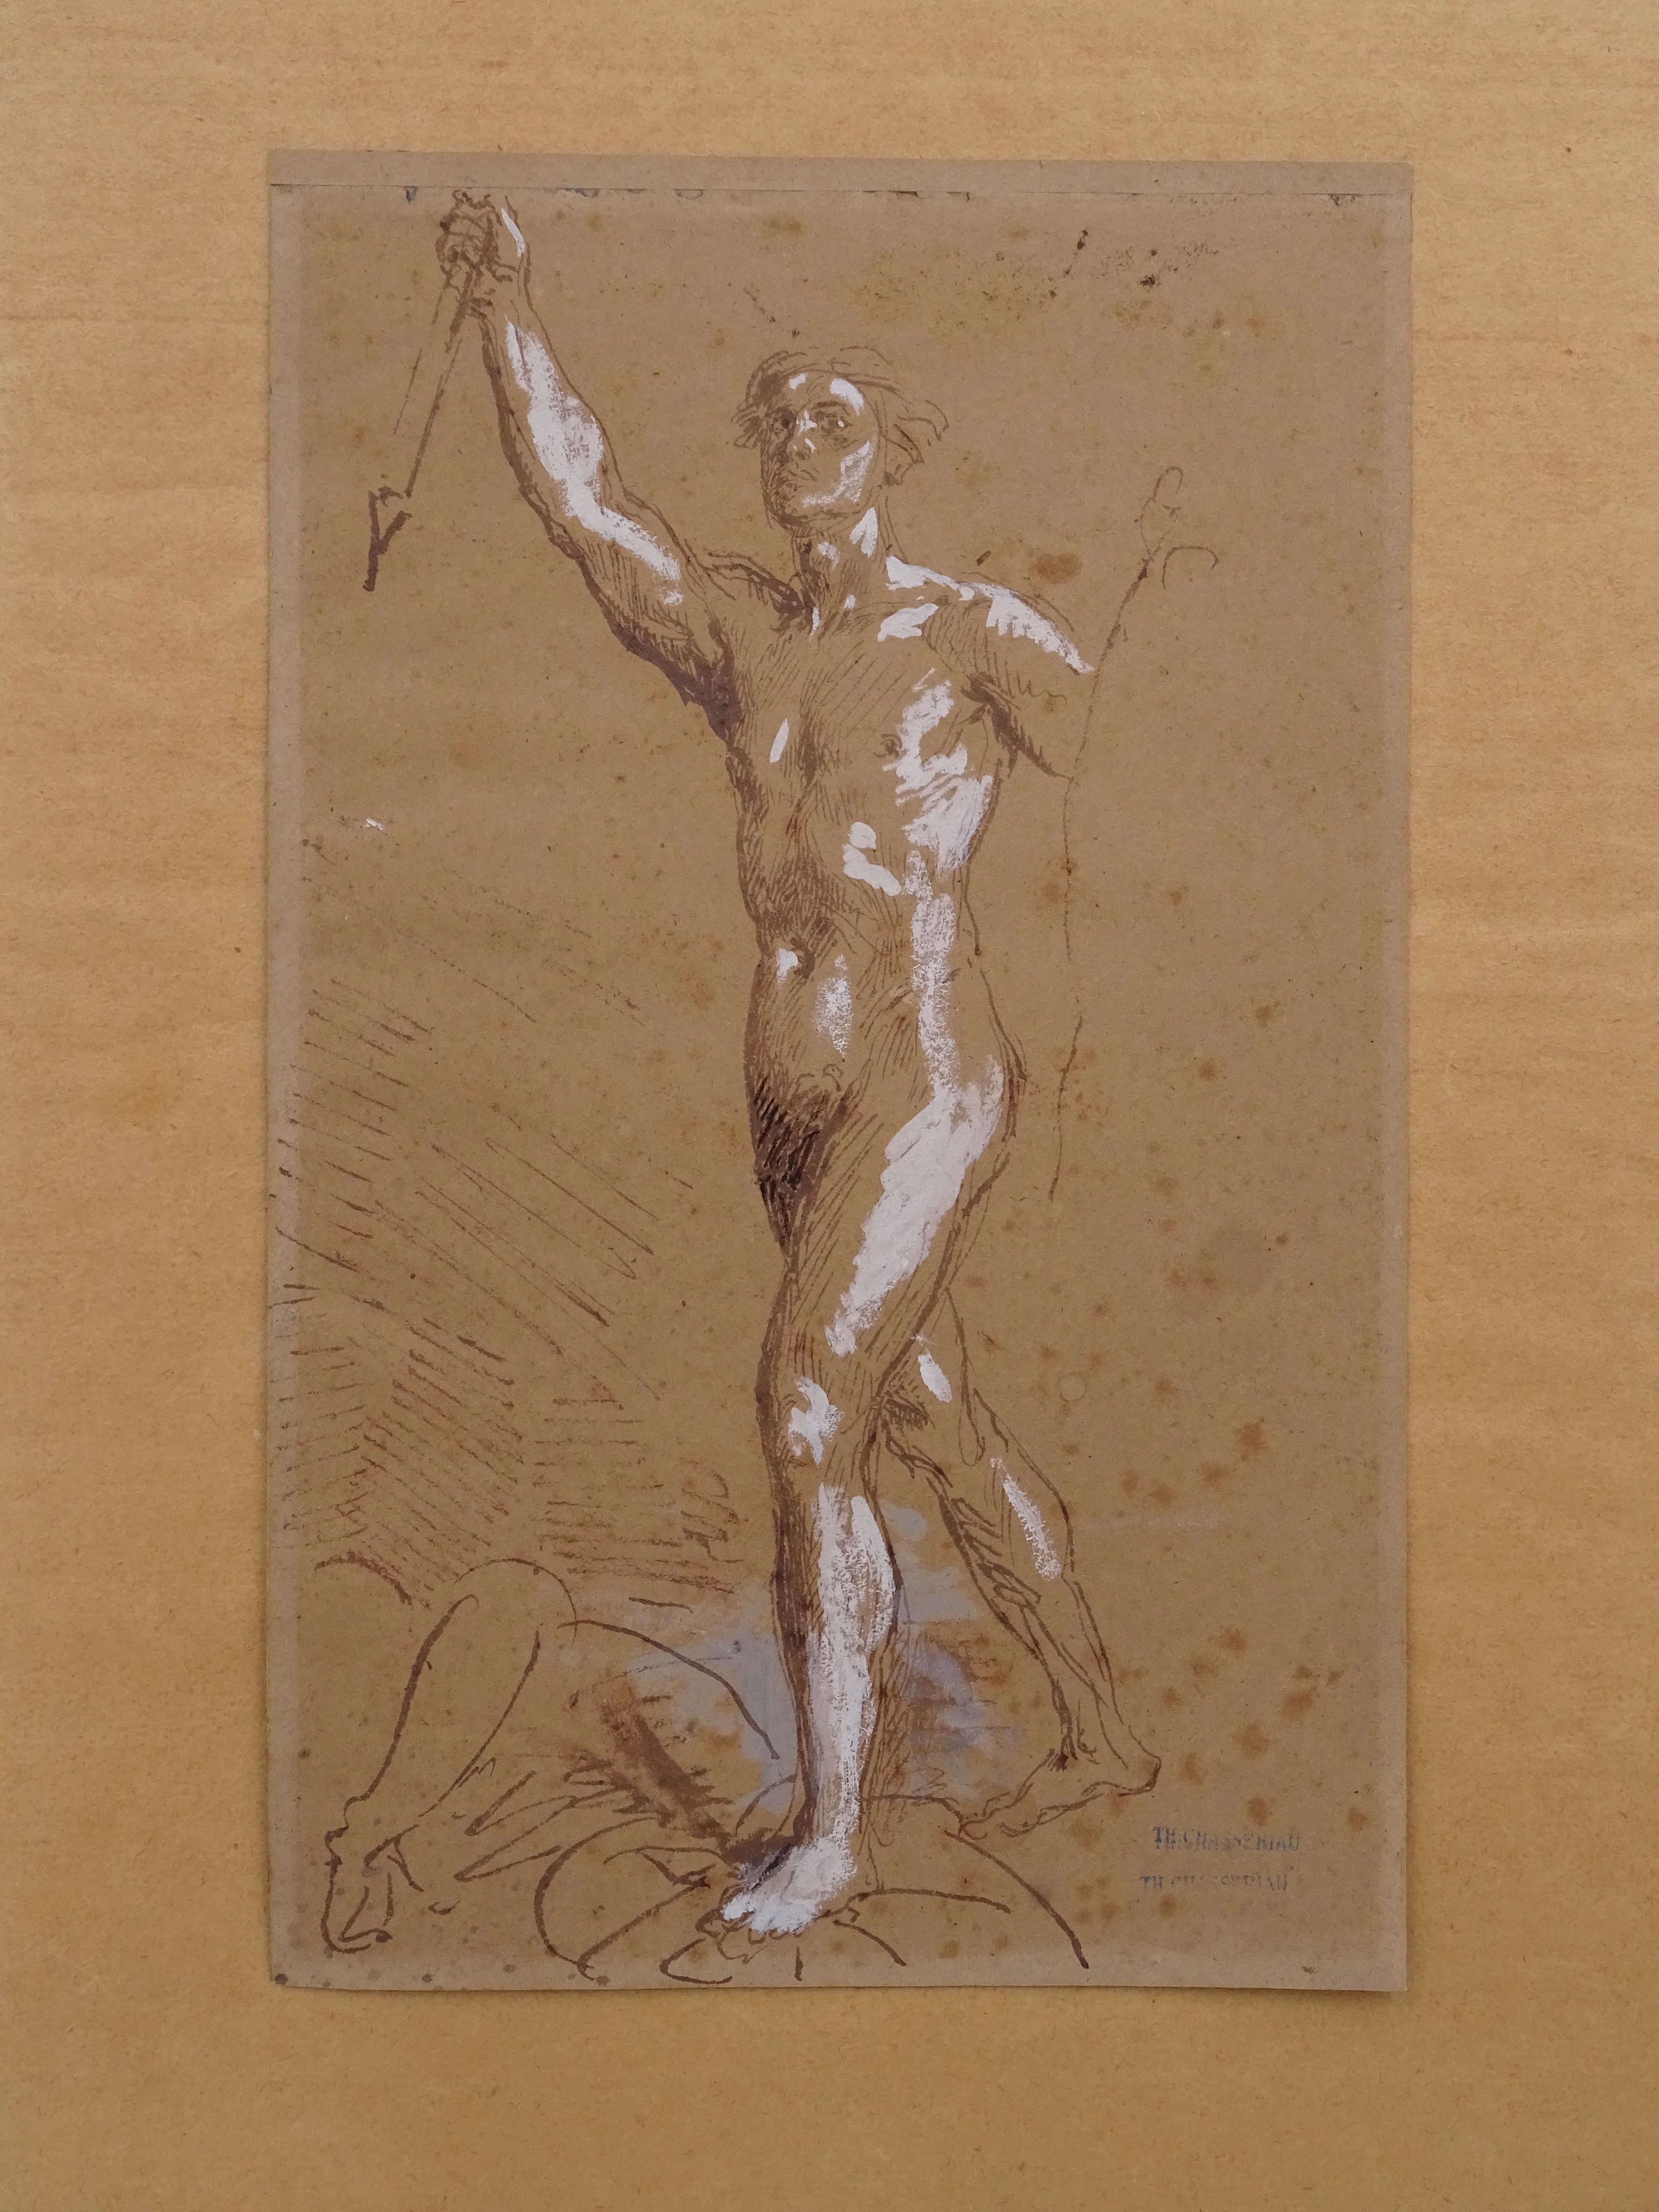 Preparatory drawing/study made in pencil and white lead on paper by French artist Théodore Chassériau in the early 1850s.

The drawing in question depicting a male nude is a preparatory drawing for a larger painting, 